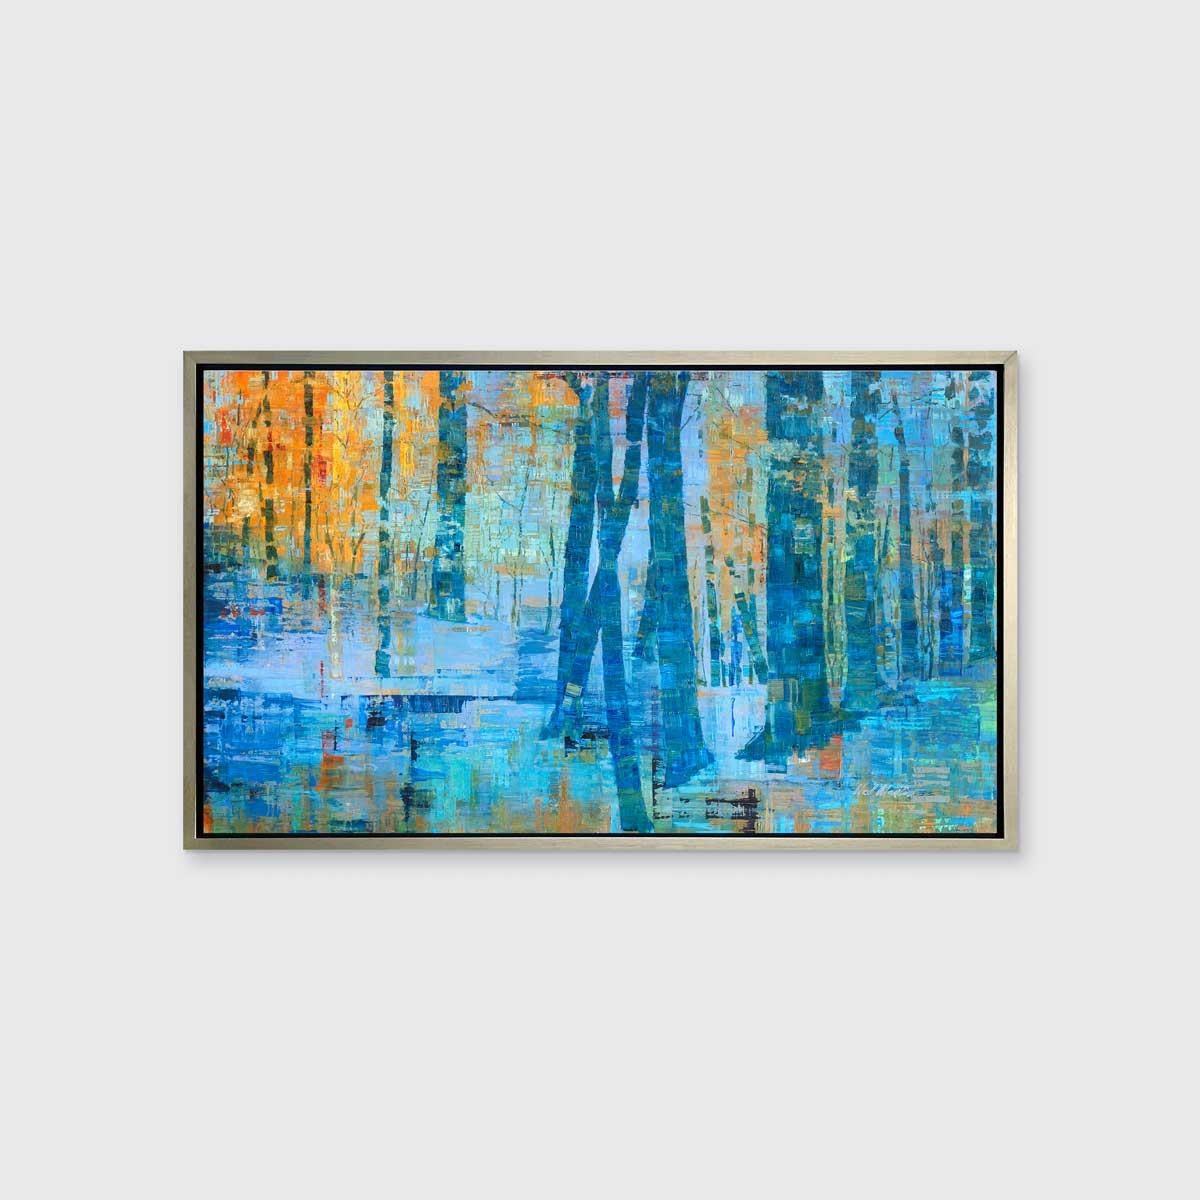 This limited edition abstract landscape print by artist Ned Martin depicts an abstracted forest with deep blues and vibrant orange hues. Tree trunks are visible spanning the width of the painting, some smaller as they recede further away from the